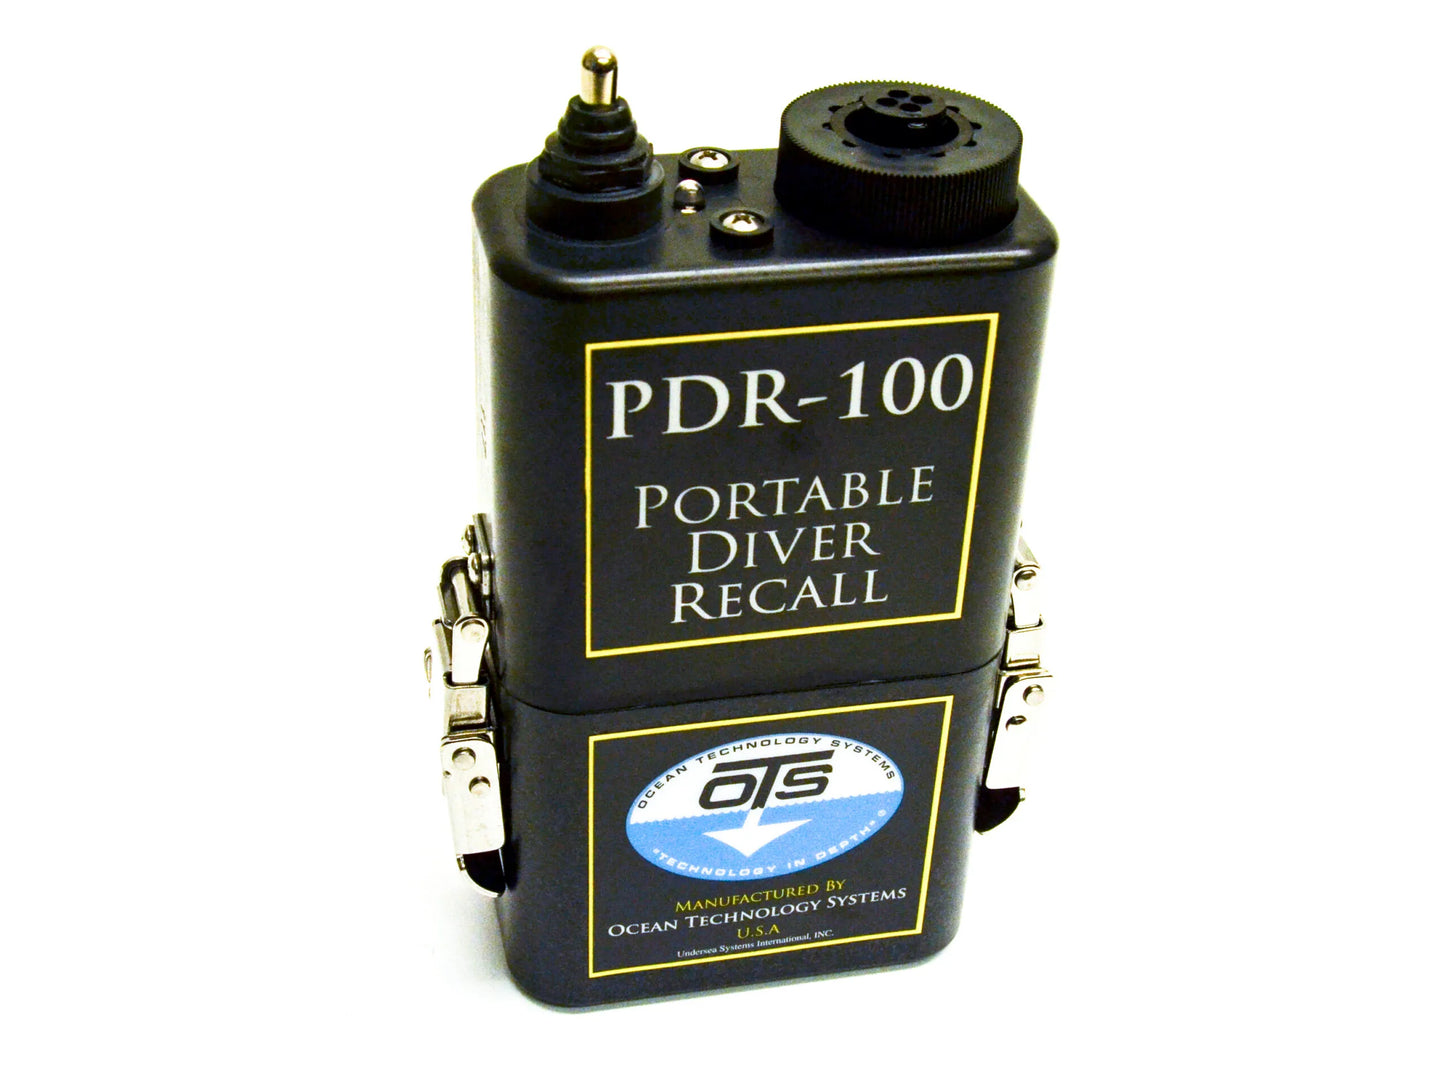 PDR-100 Portable Diver Recall